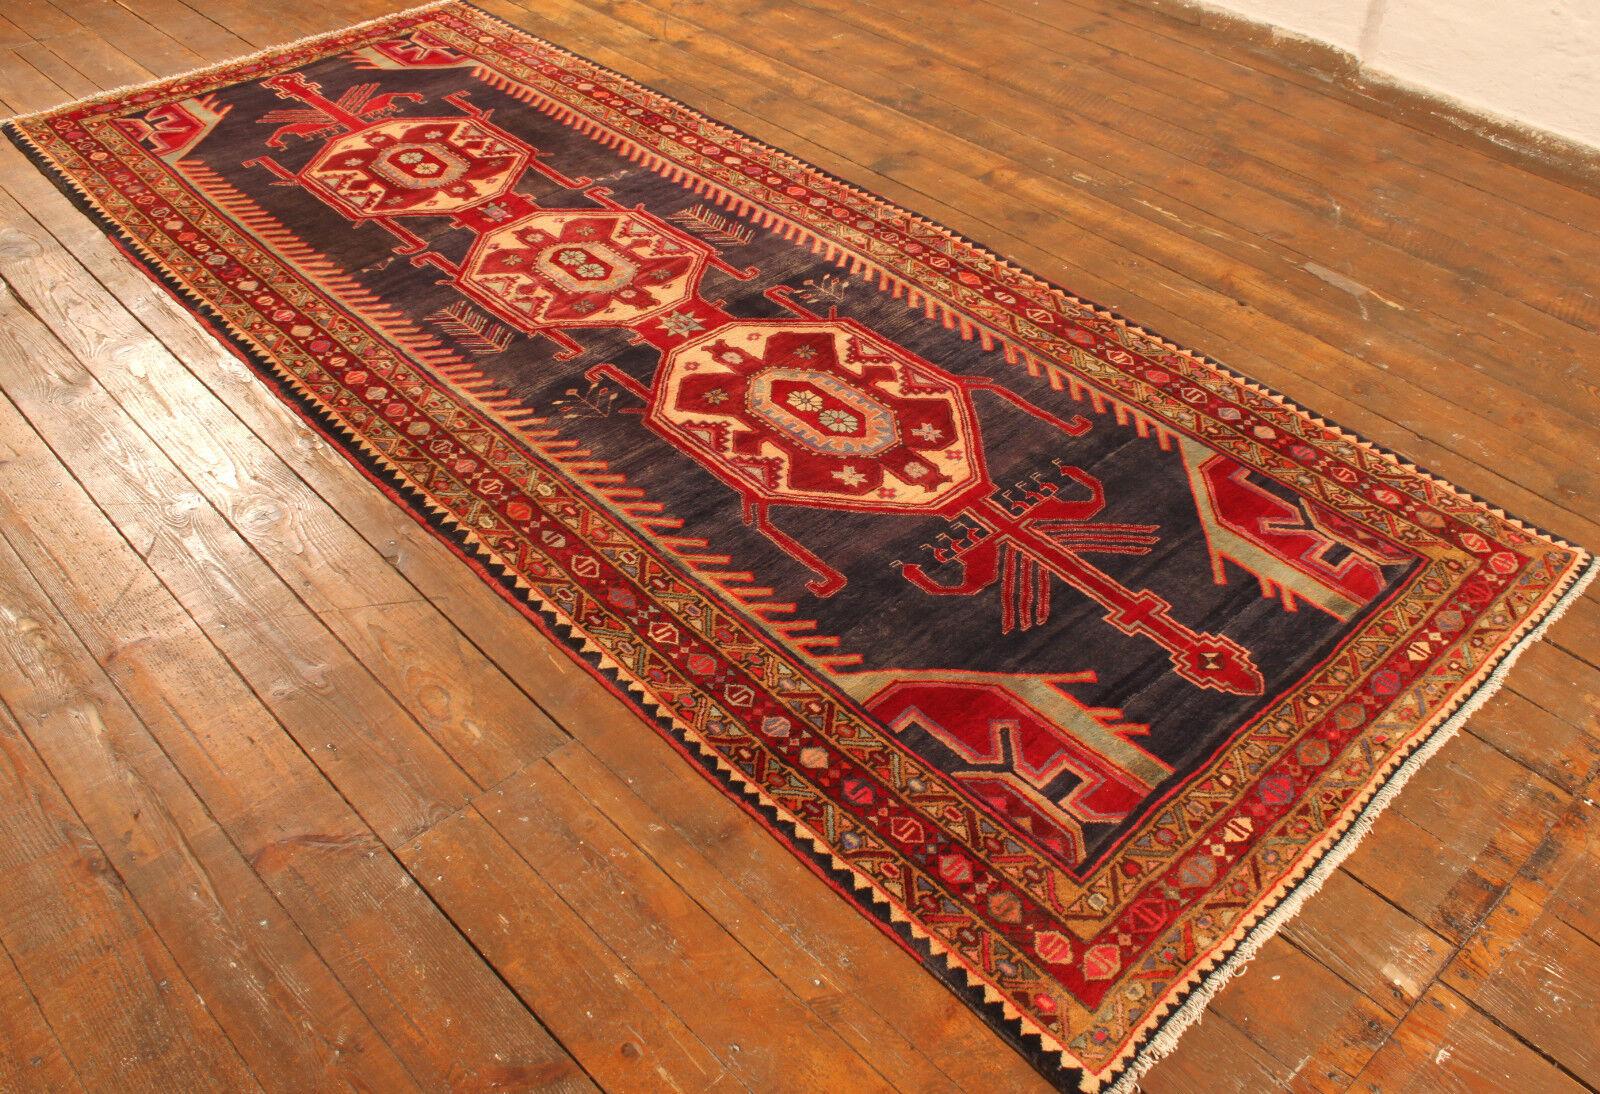 Handmade Vintage Persian Style Malayer Rug 4.2' x 10.7', 1970s - 1T23 For Sale 2